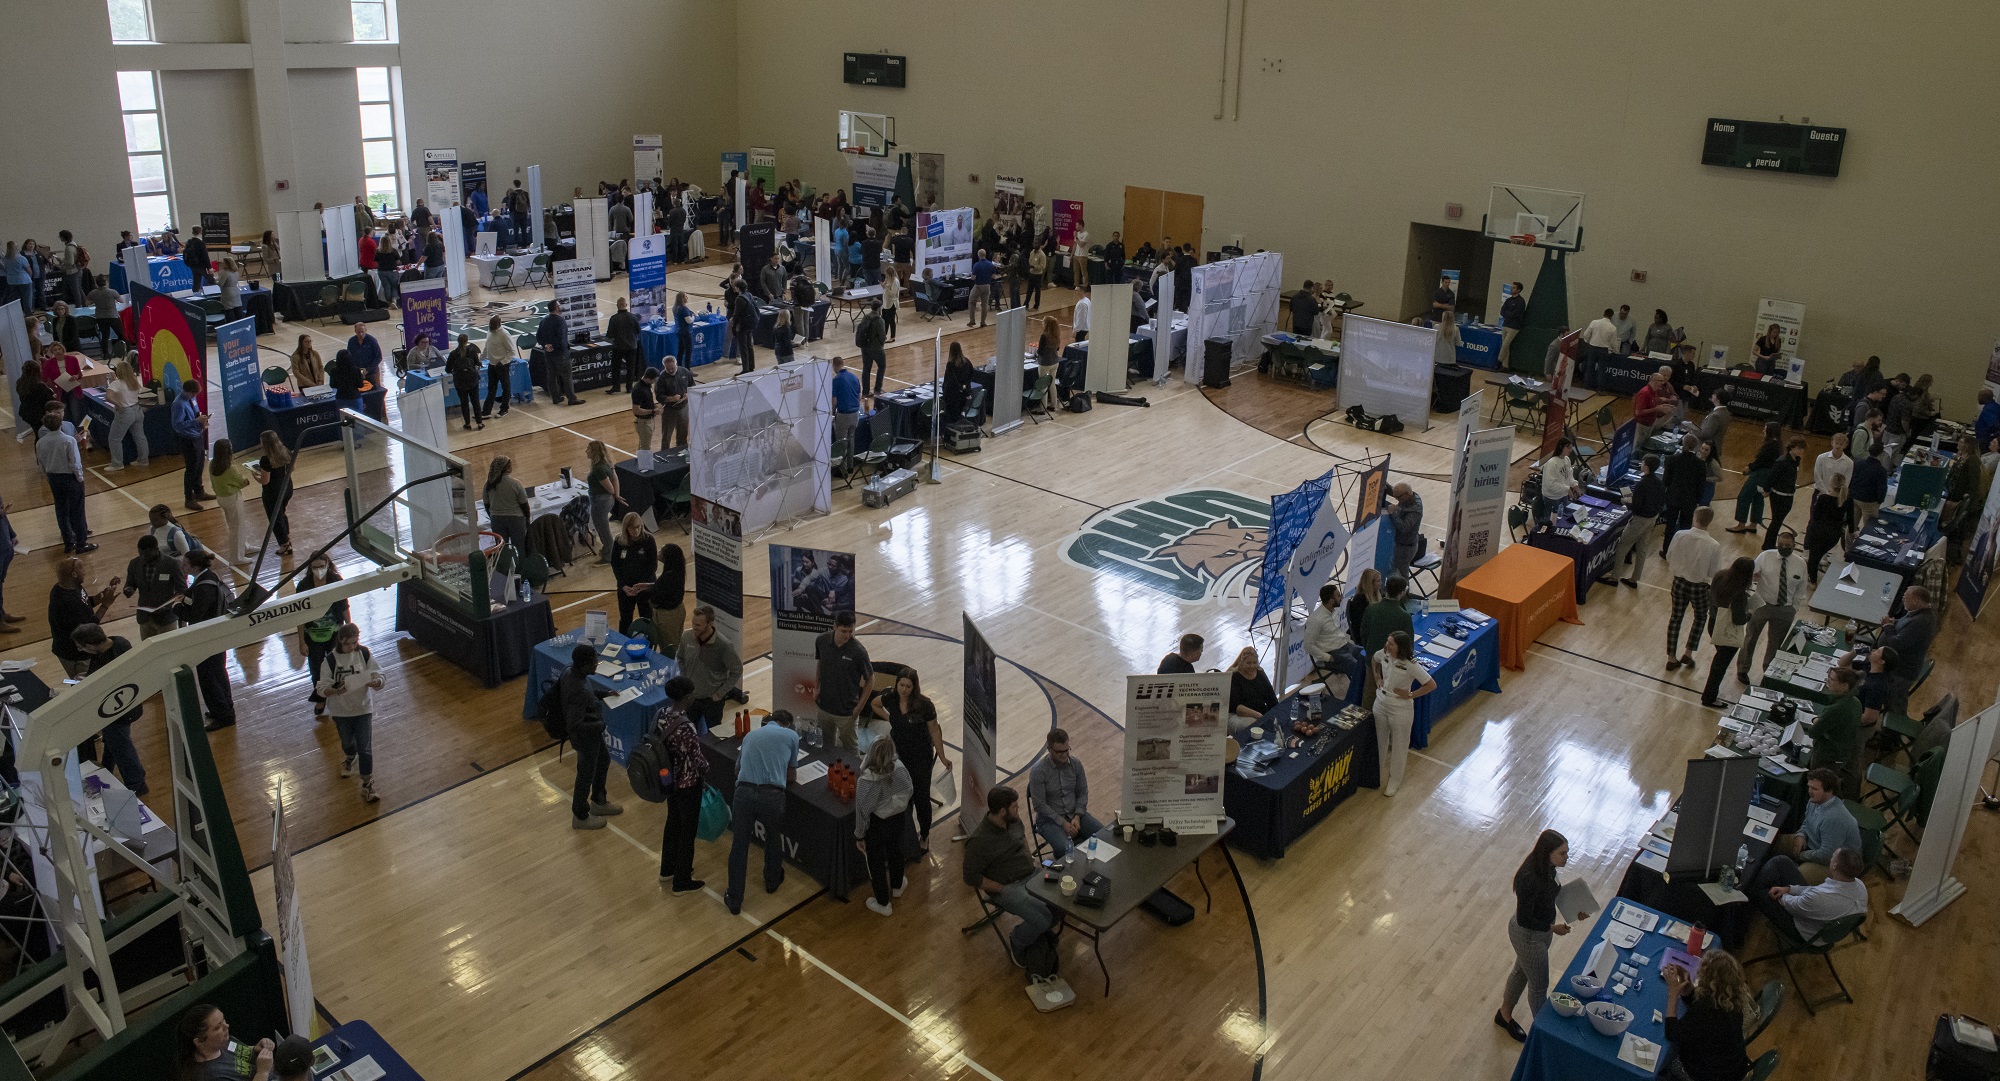 Update That Resume – Spring Career and Internship Fair Set for February 22nd